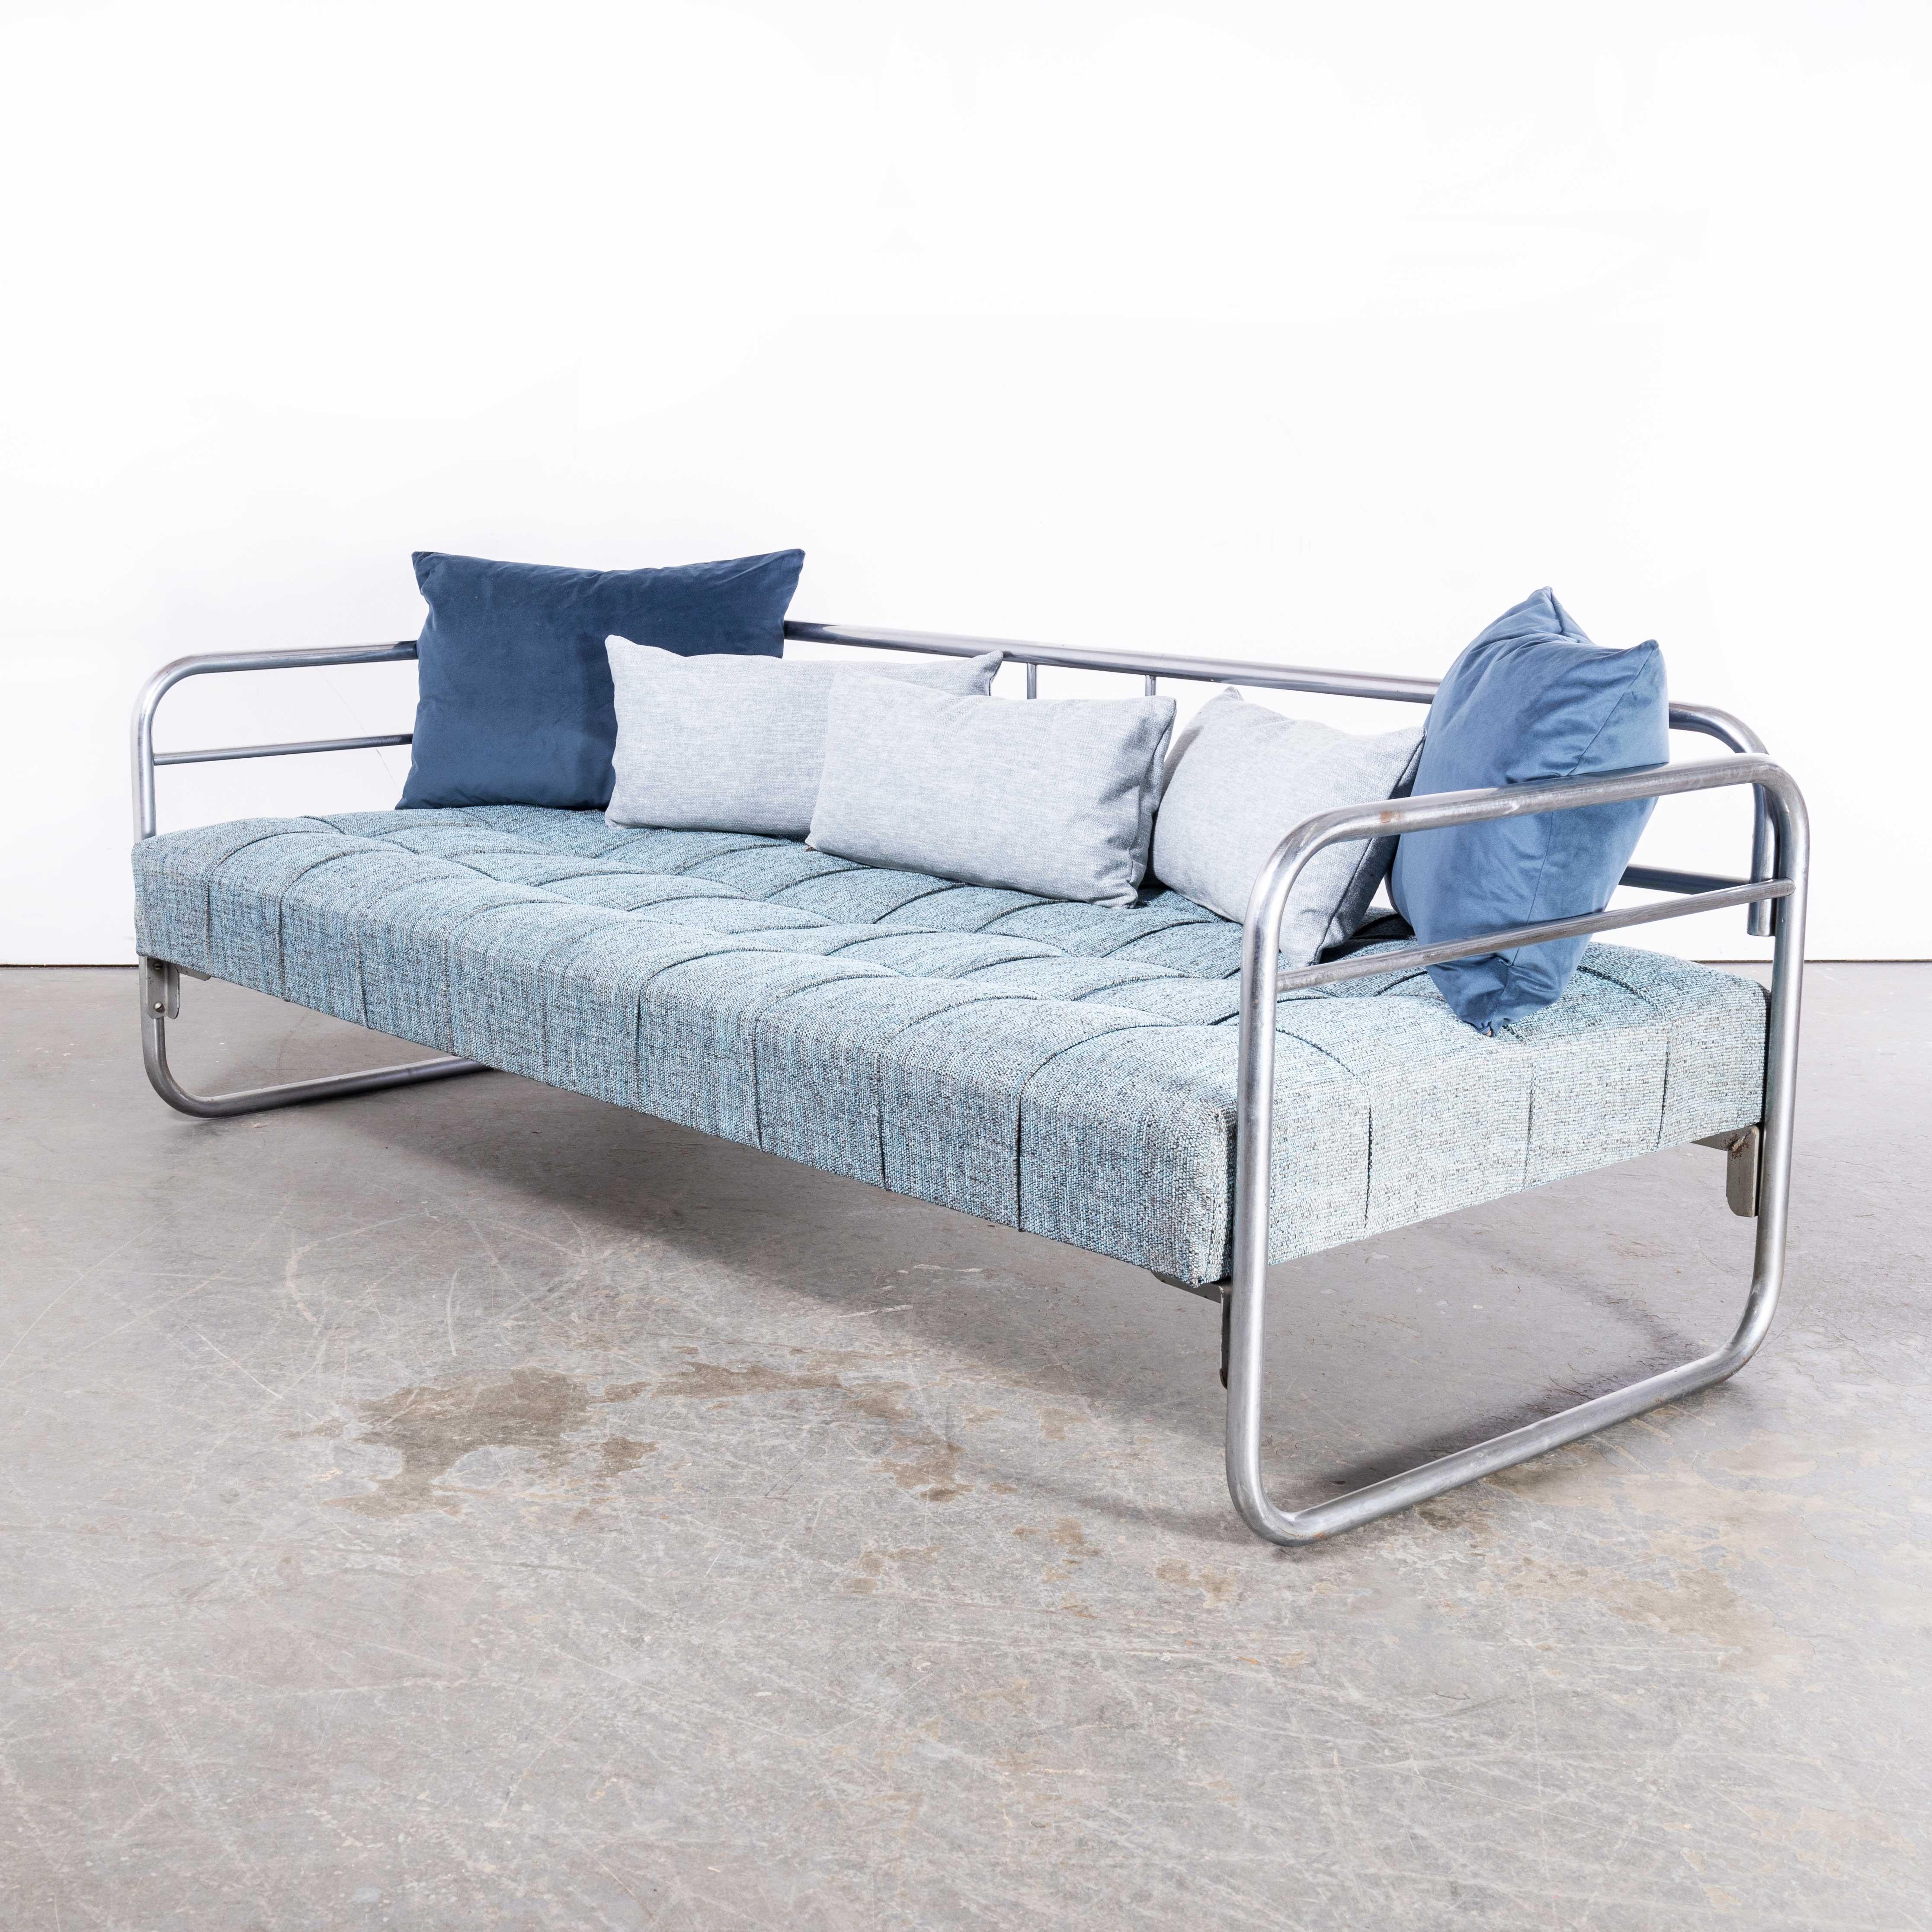 1950's Original Daybed By Mucke Melder - Fully Restored In Good Condition For Sale In Hook, Hampshire